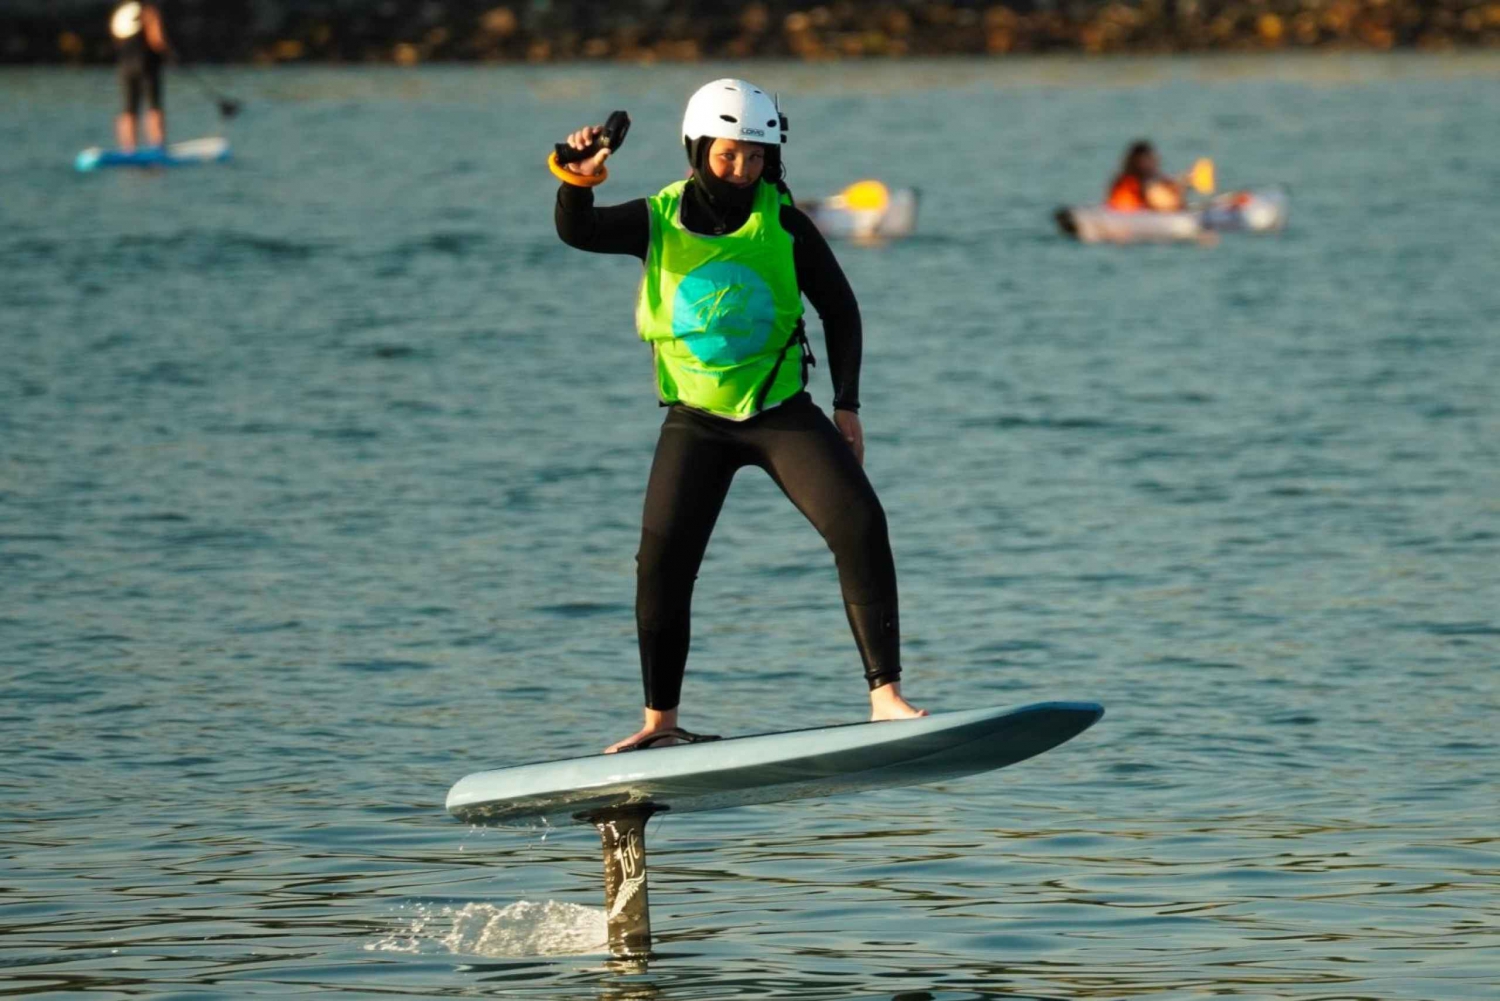 Edinburgh: Fly Over Water On an Electric Hydrofoil Surfboard